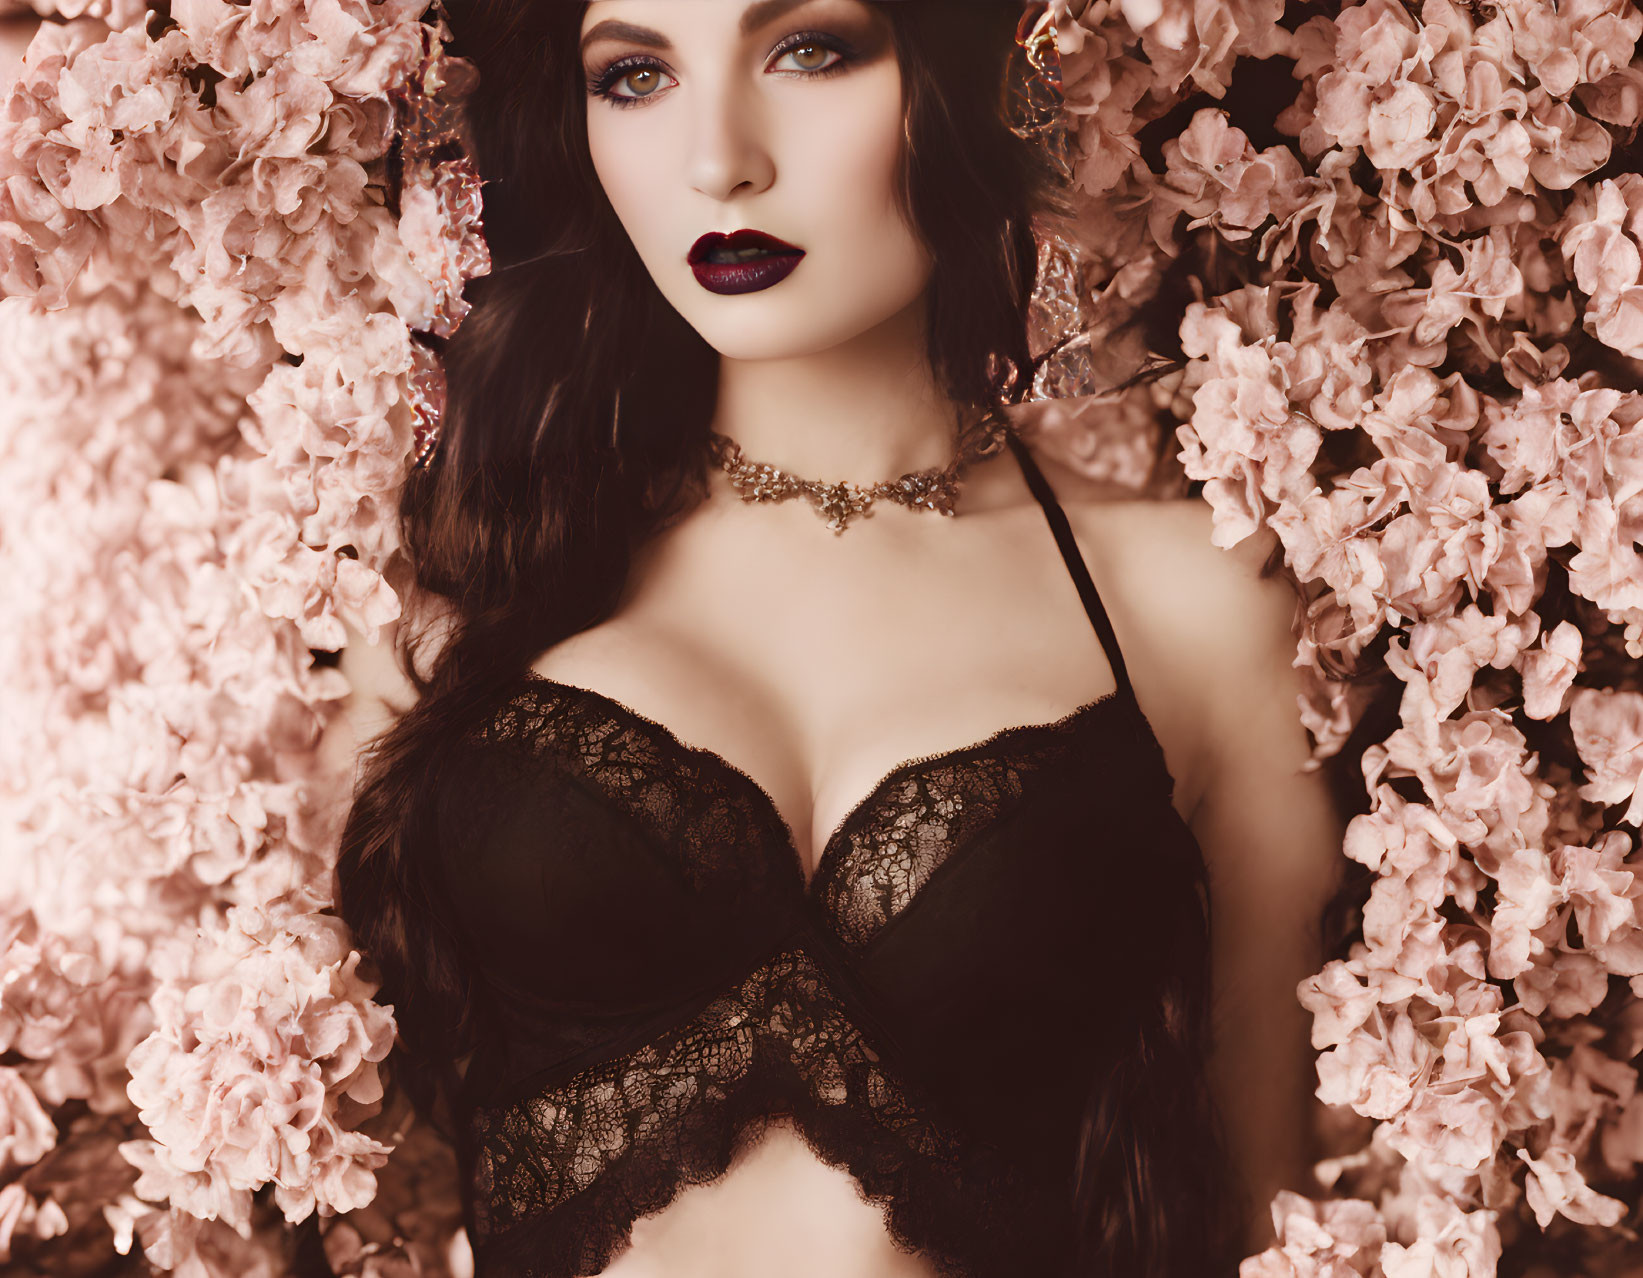 Dark-haired woman in lace garment amid pink blossoms with choker necklace